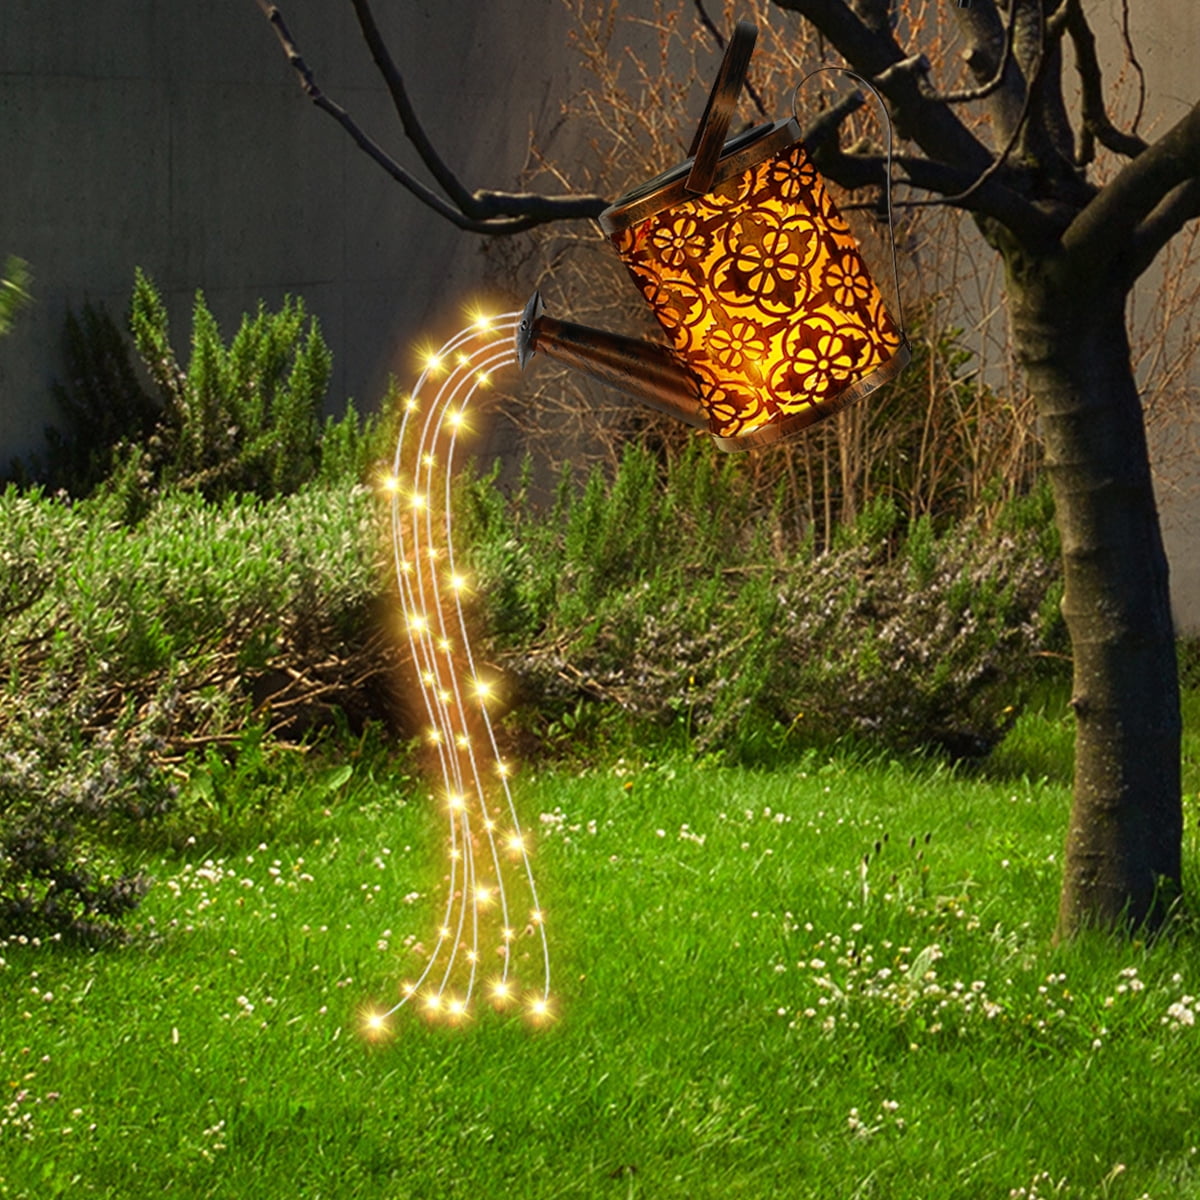 LED Solar Watering Can String Light Outdoor Garden Art Waterfall Lamp Decoration 